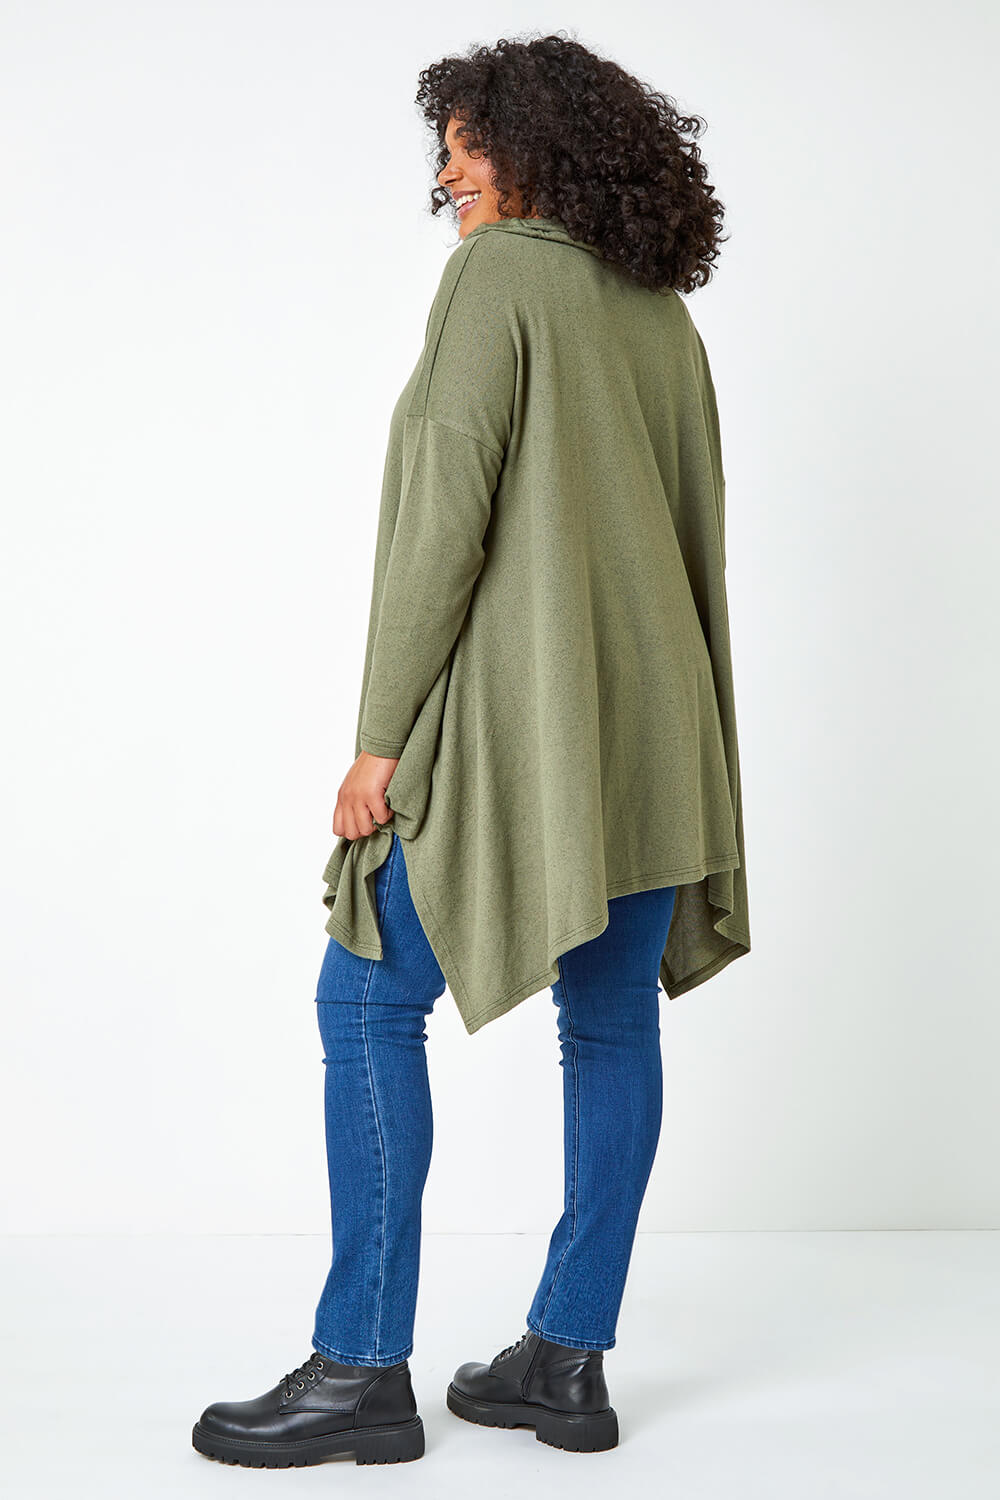 KHAKI Curve Cowl Neck Relaxed Stretch Top, Image 3 of 5